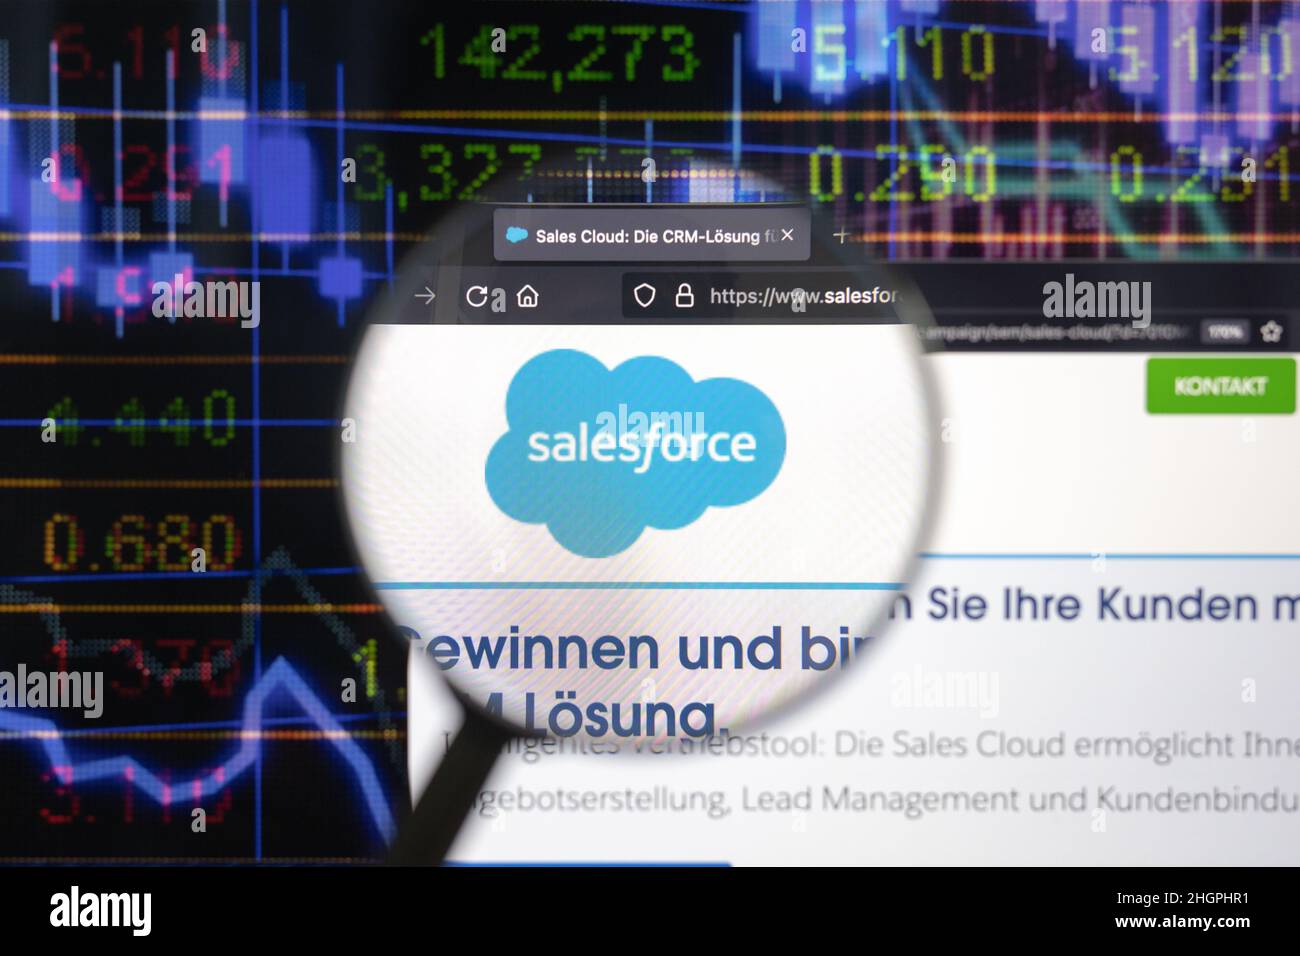 Salesforce company logo on a website with blurry stock market developments in the background, seen on a computer screen through a magnifying glass. Stock Photo